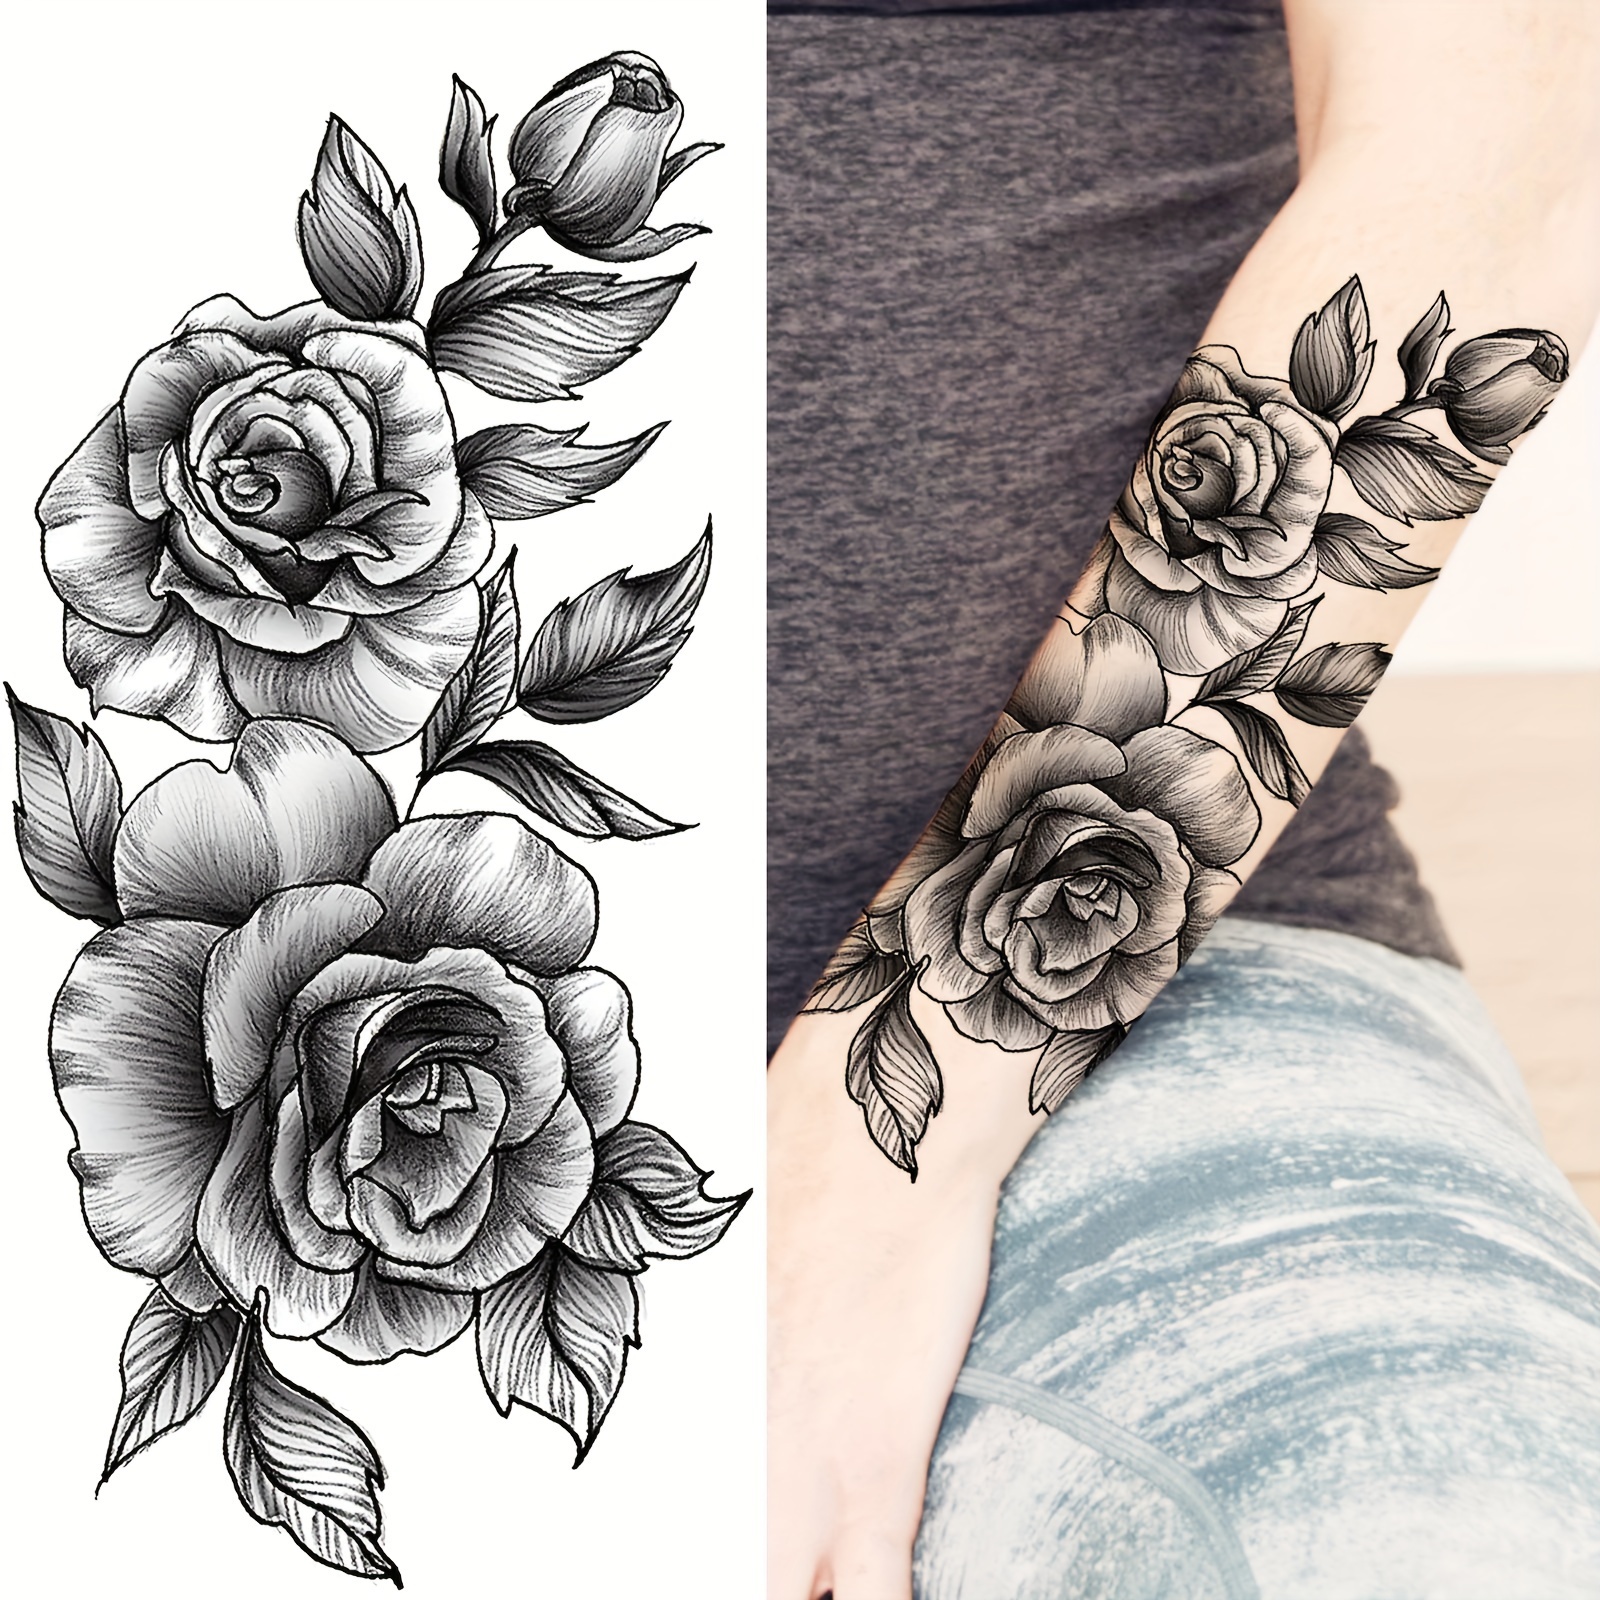 

Waterproof Black Rose Temporary Tattoo Sleeve For Women - Realistic Floral Design, Long-lasting Fake Tattoo Sticker For Arms & Body Art